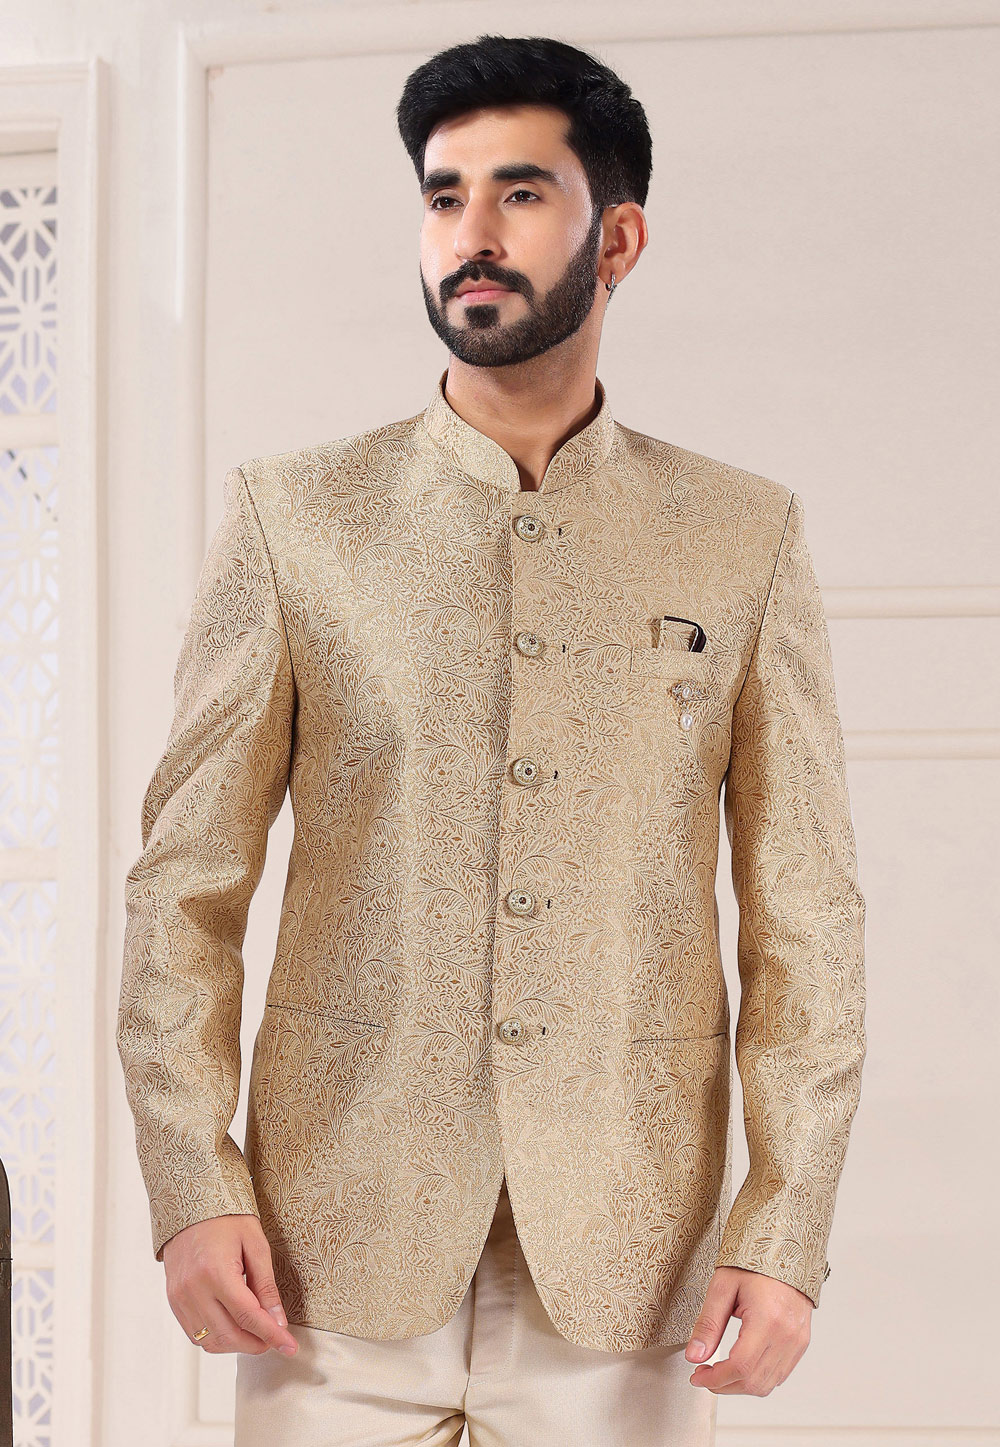 G3+ Fashions - Designer Flower Printed Cream Color Men's Jodhpuri Suit.  ➡Click to see price & more details -https://bit.ly/2LEaUMU ✓Click to  Whatsapp Chat https://api.whatsapp.com/send?phone=919898511131 or Call  +91-9898511131 👉Try Shopping with G3+ ...